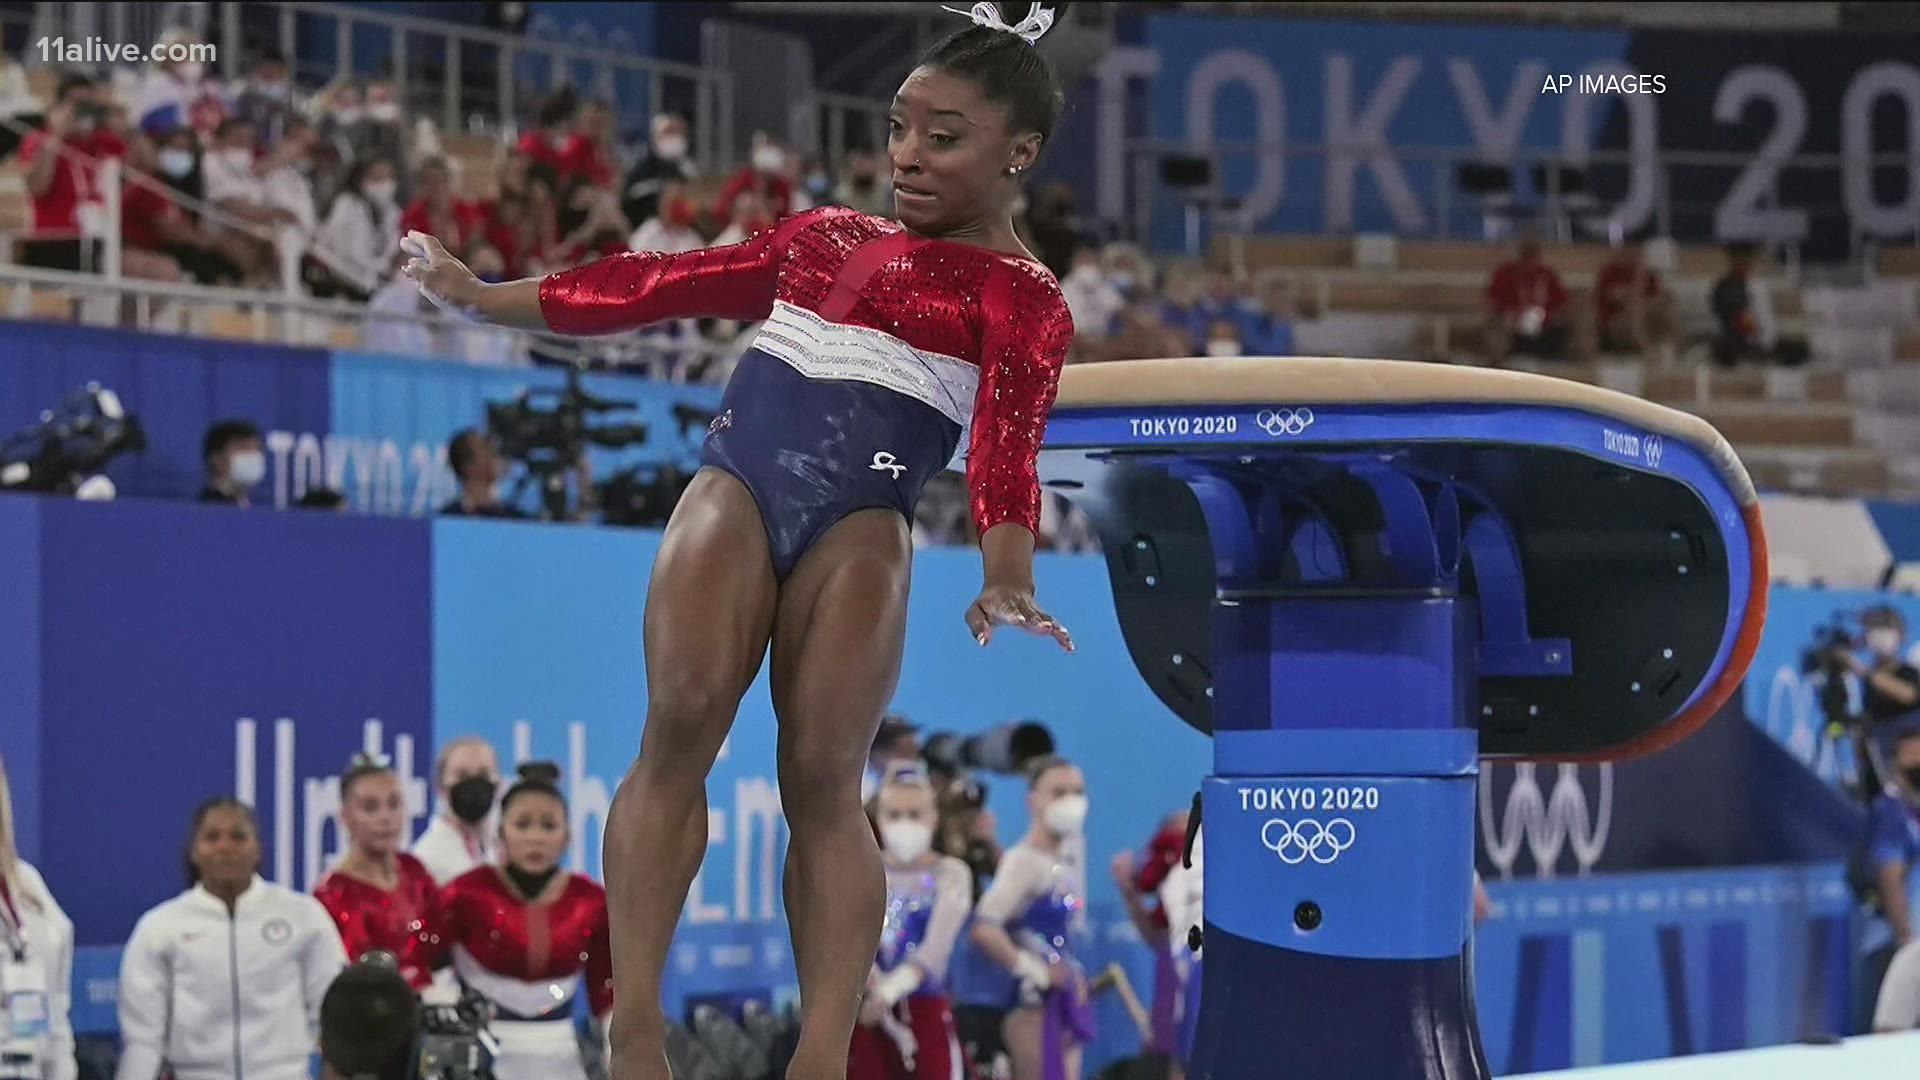 Biles drilled a slightly altered routine a week after taking herself out of several competitions to focus on her mental health.